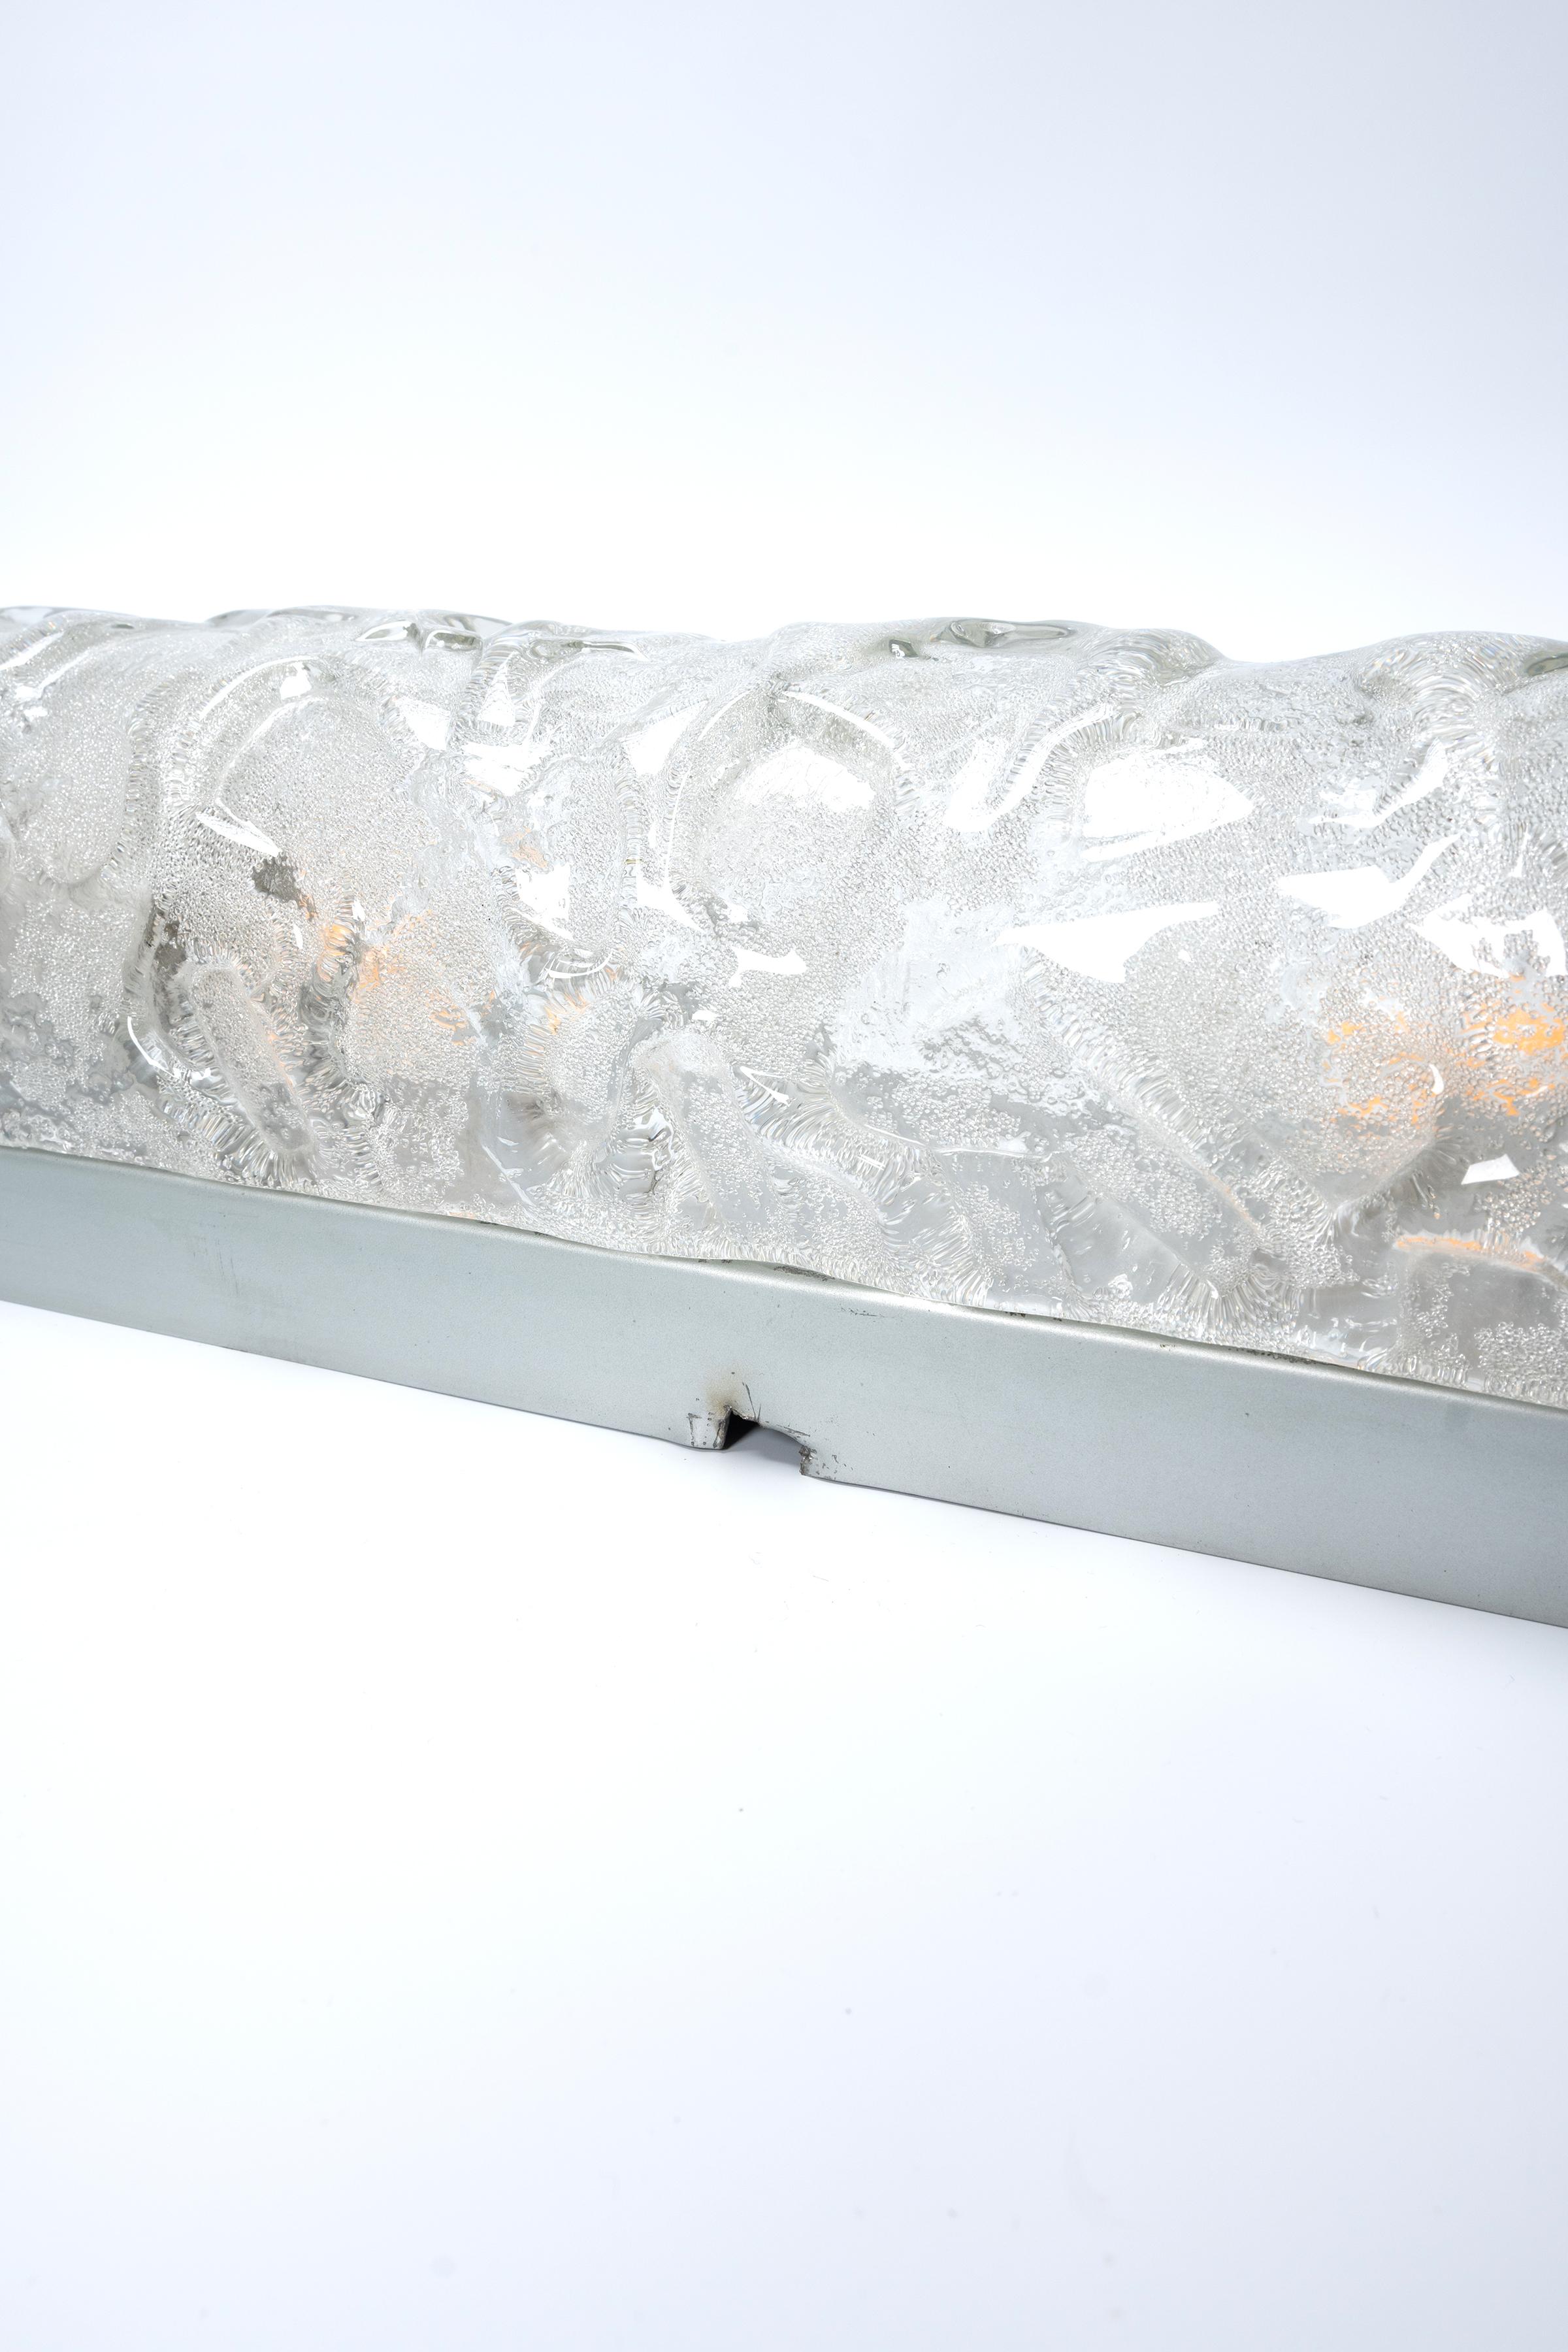 Large Murano Ice Glass Sconce Wall Light Hillebrand, Germany C.1970 For Sale 3